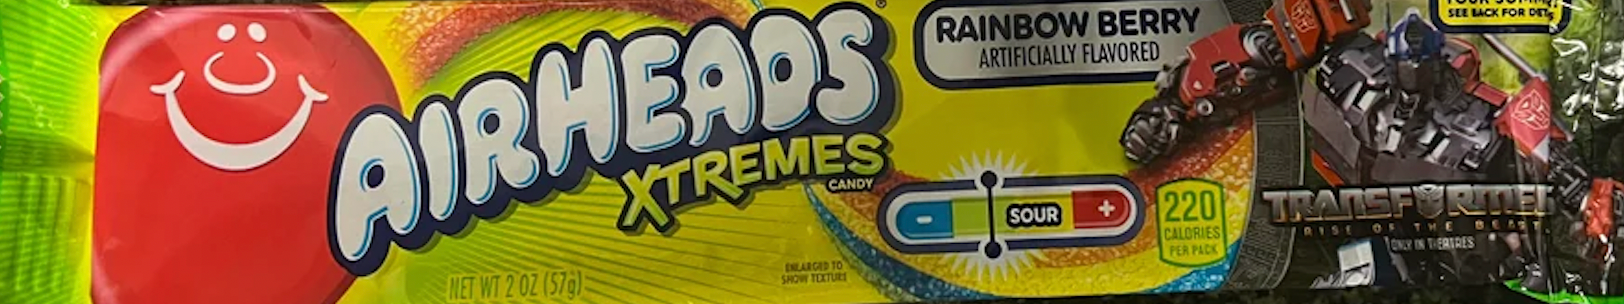 AIRHEADS Xtremes Bites Rainbow Berry Transformers Edition 57g (12 Pack) - V47